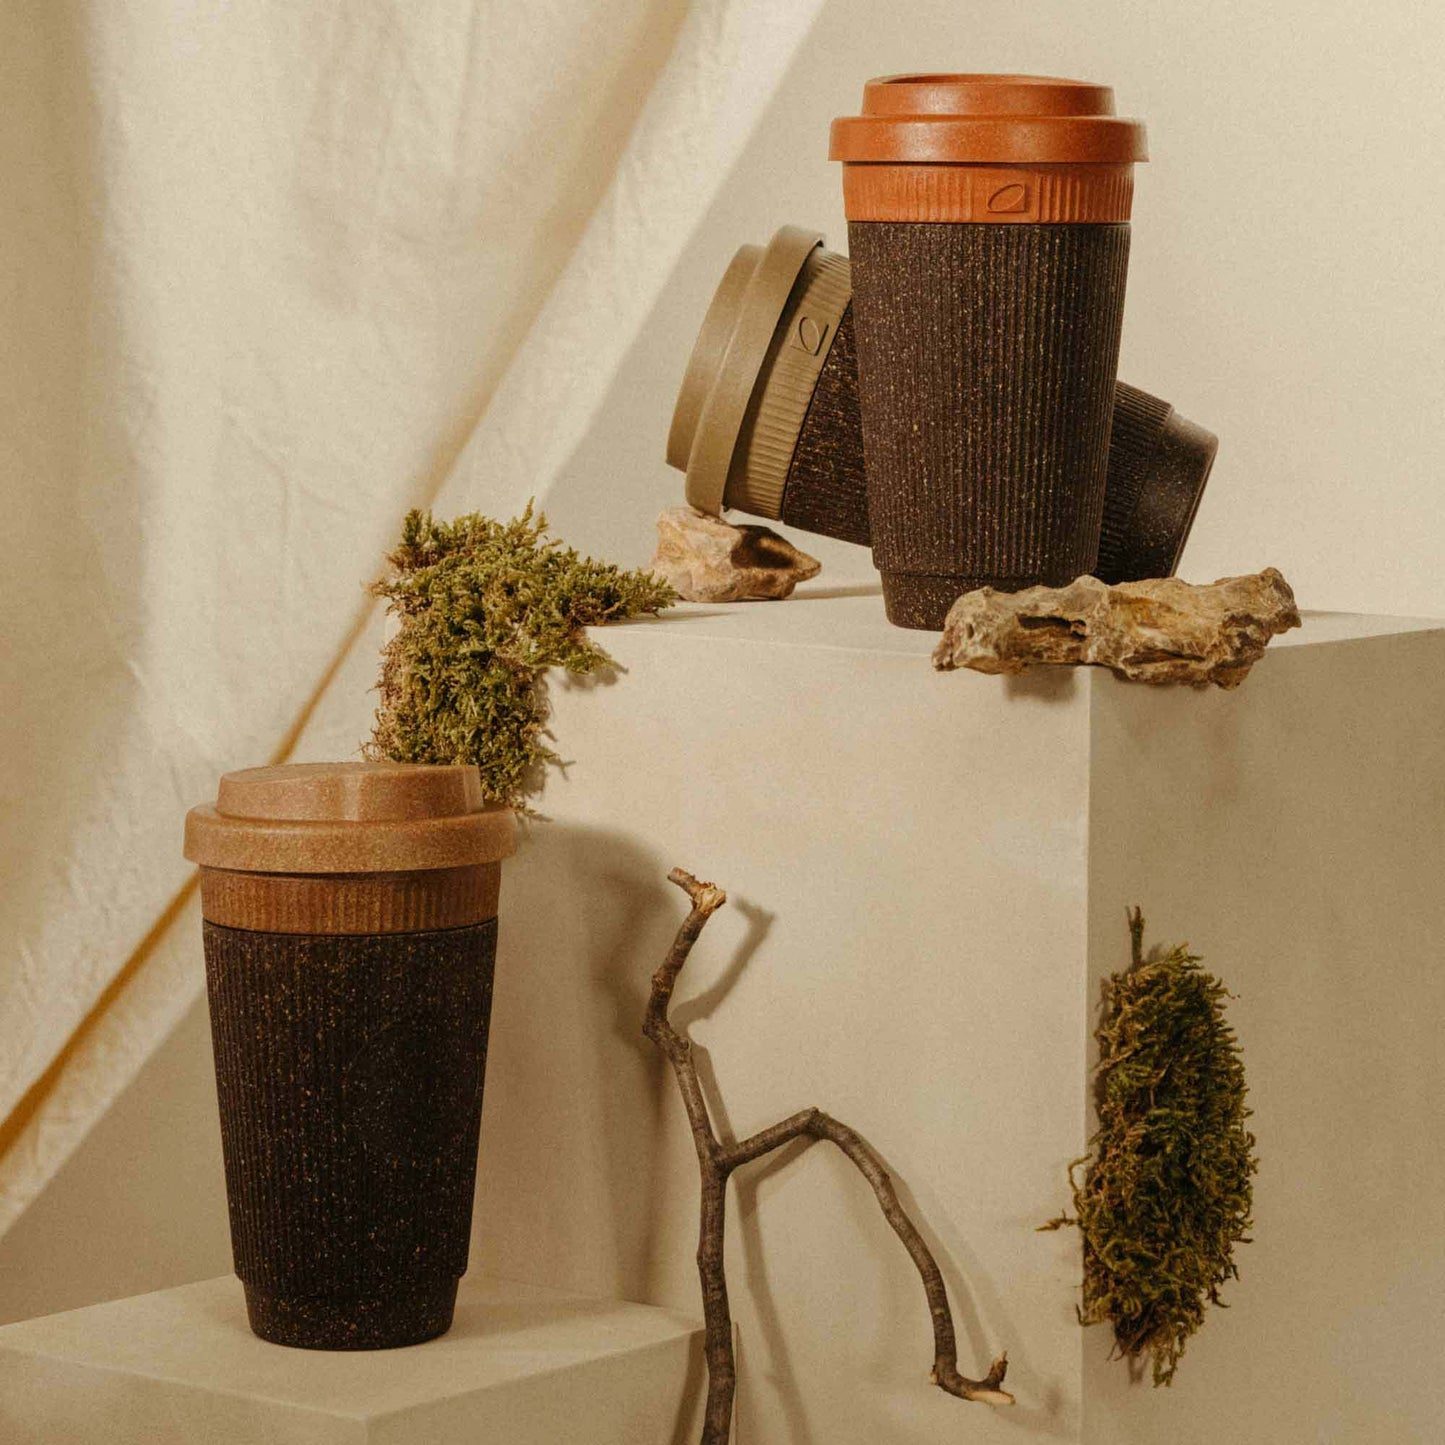 Weducer Reusable Cup